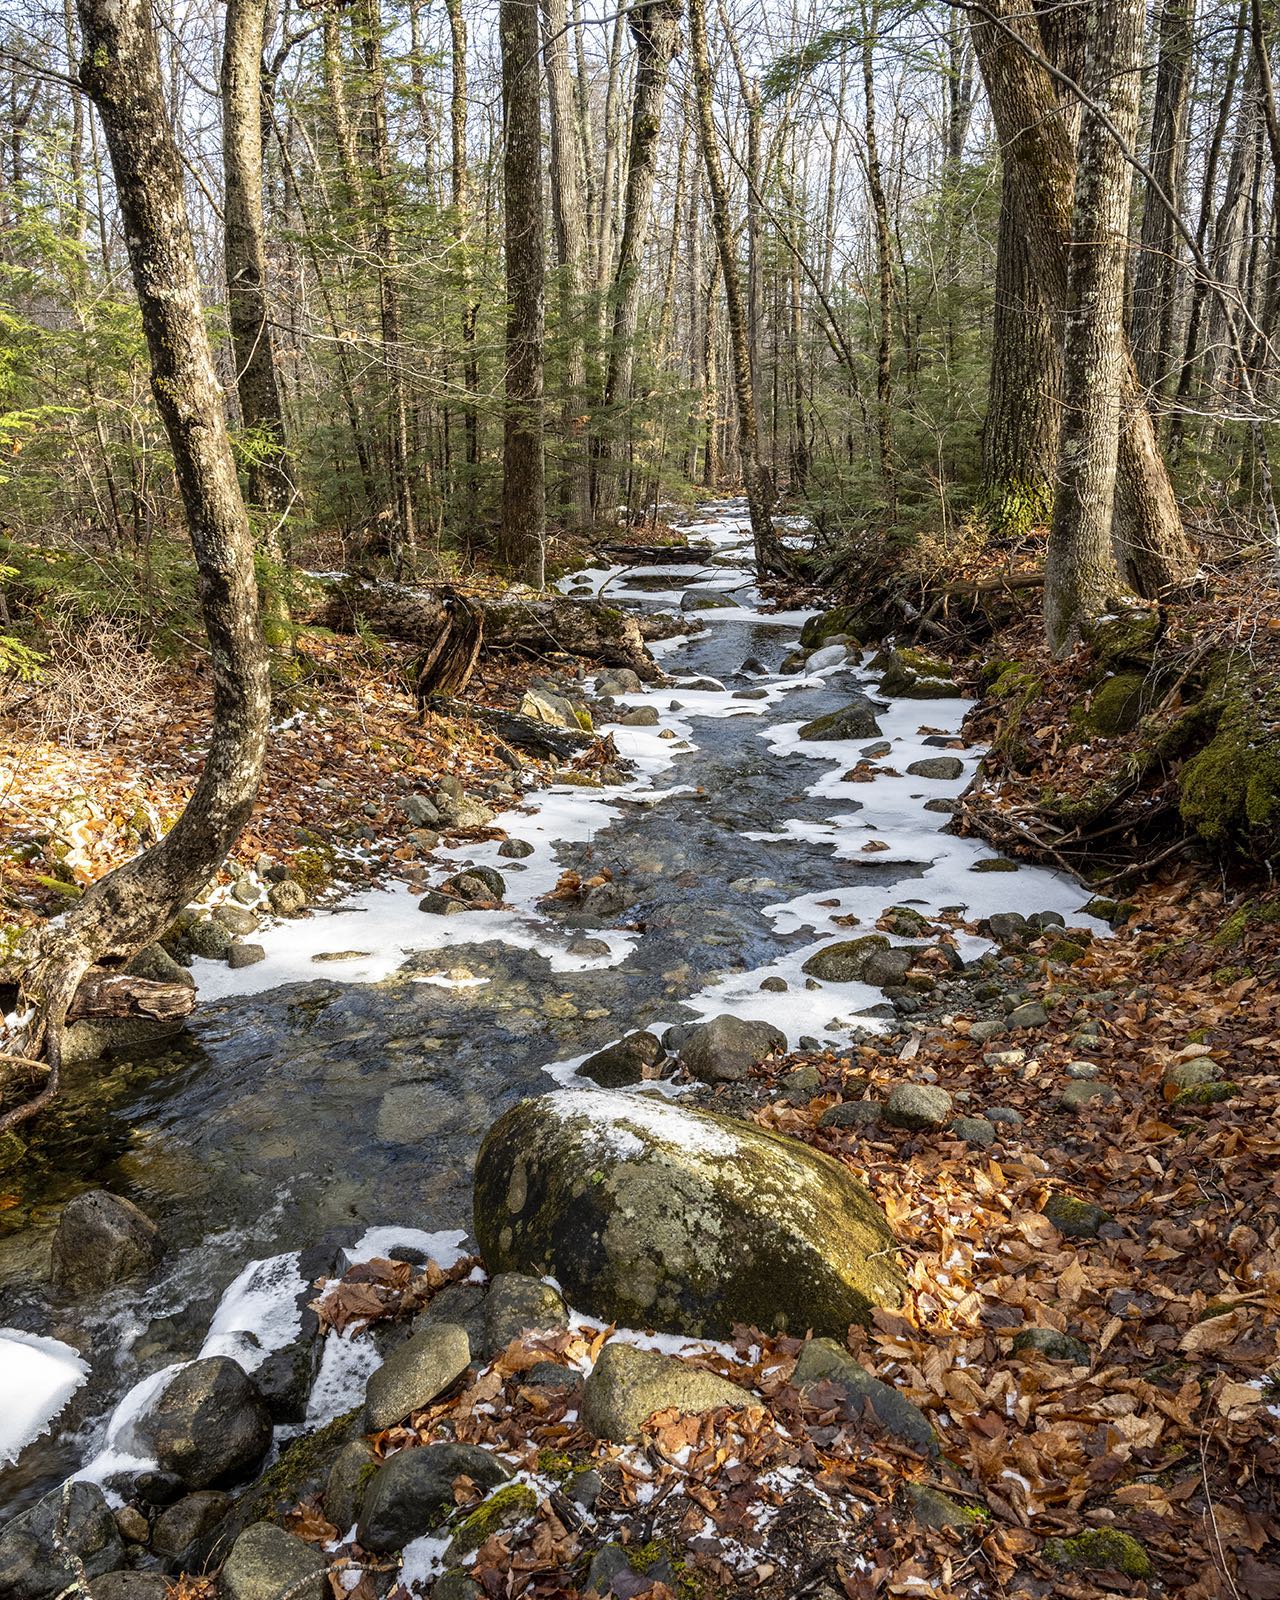 This small stream along the Appalachian Trail was outlined by thin ice as we Hiked Little Bigelow yesterday. Leafless trees provide open views into the woods and added depth to the forest landscape as we transition to winter. #appalachiantrail #orcuttphotography #mainenaturephotography #transitionseason #mainetheway #maineisgorgeous #downeastmagazine